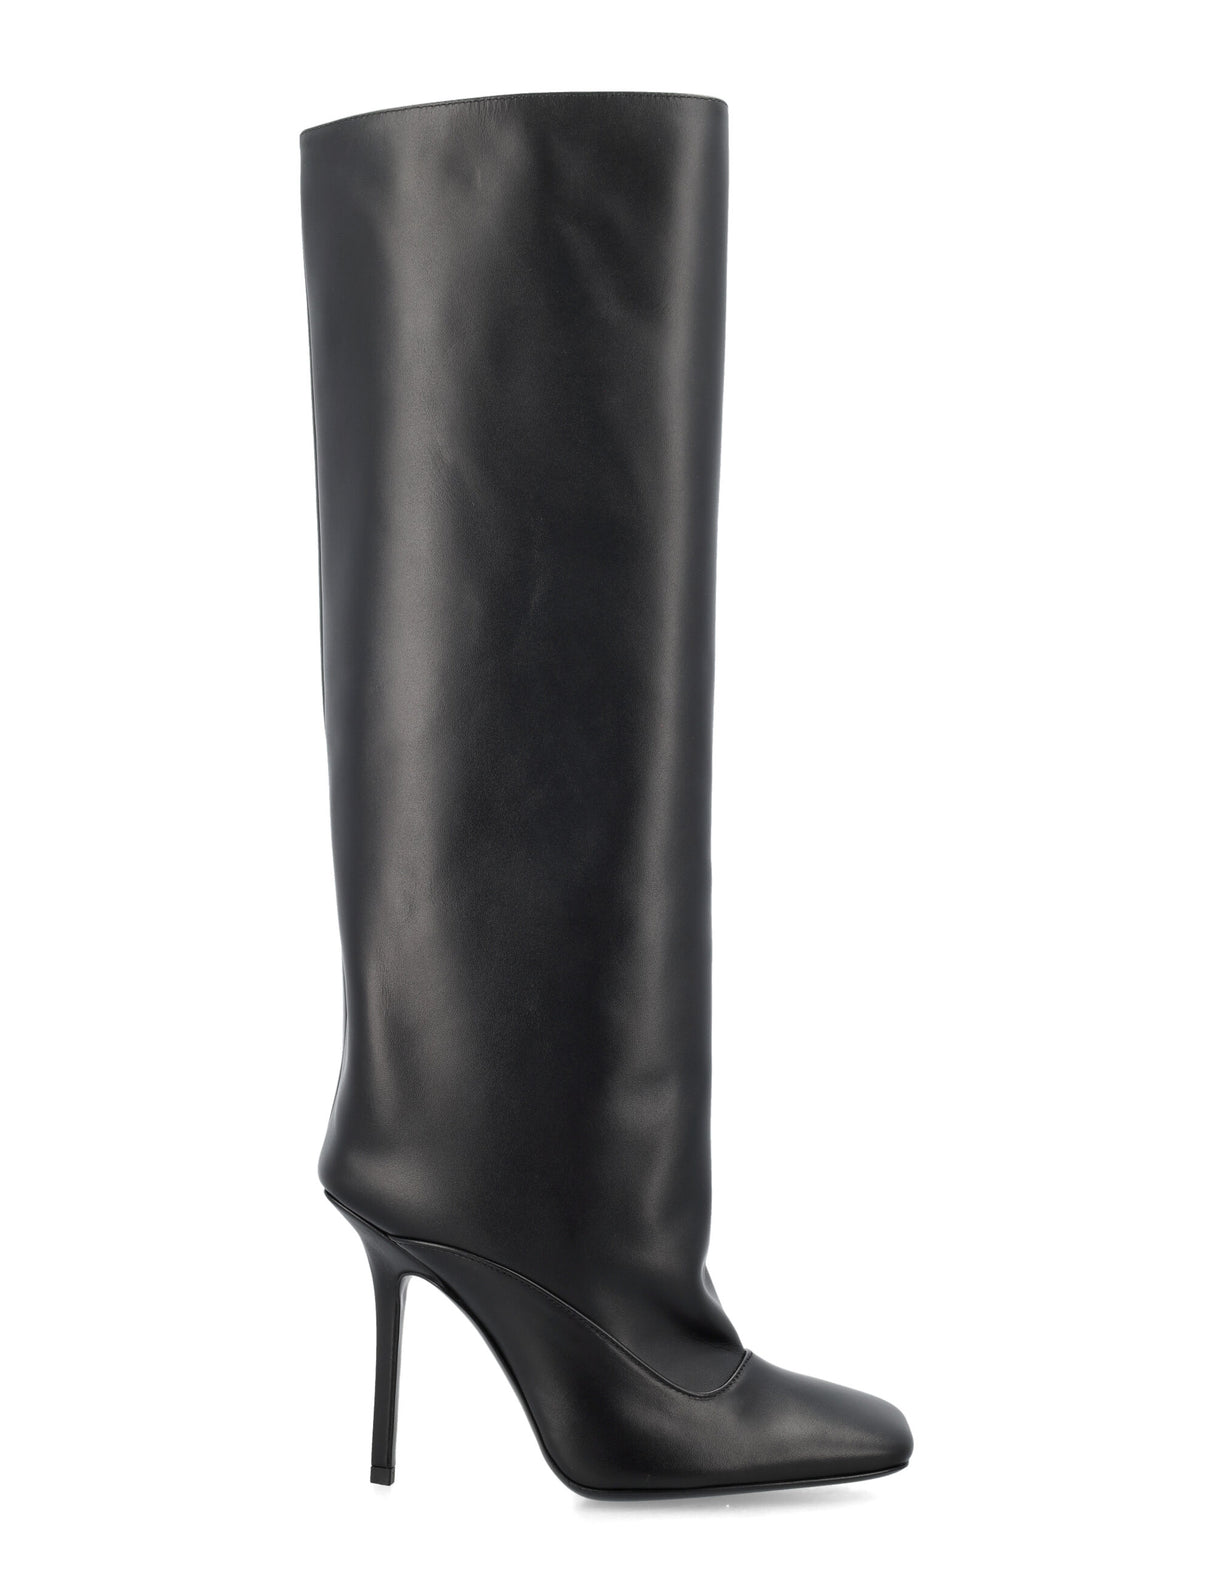 Stunning Sienna Leather Boot 105 for Women by The Attico - FW23